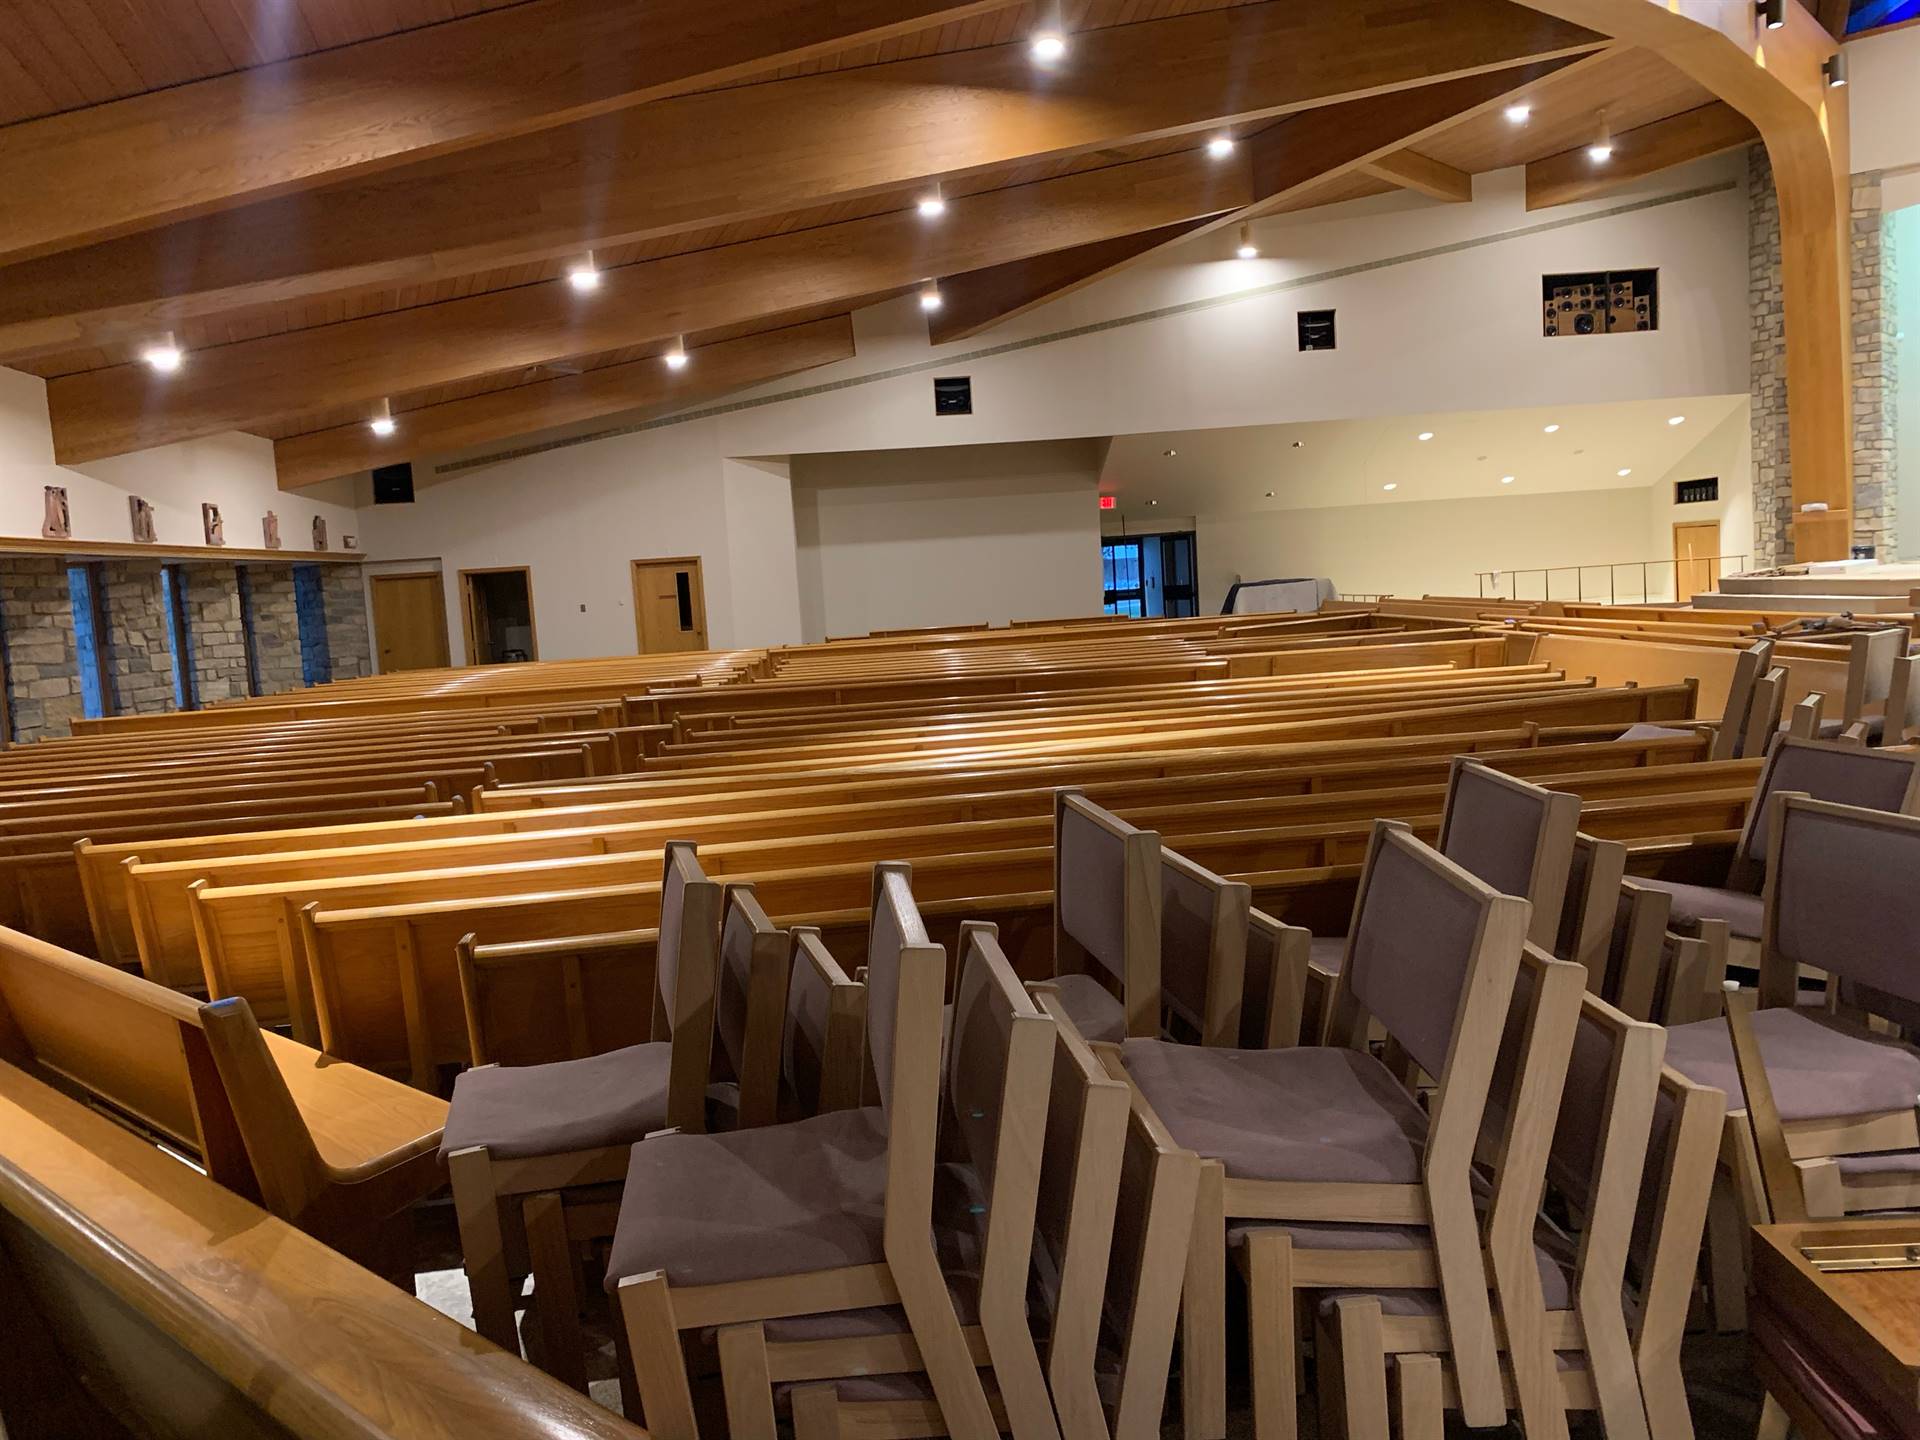 pews stacked to the side